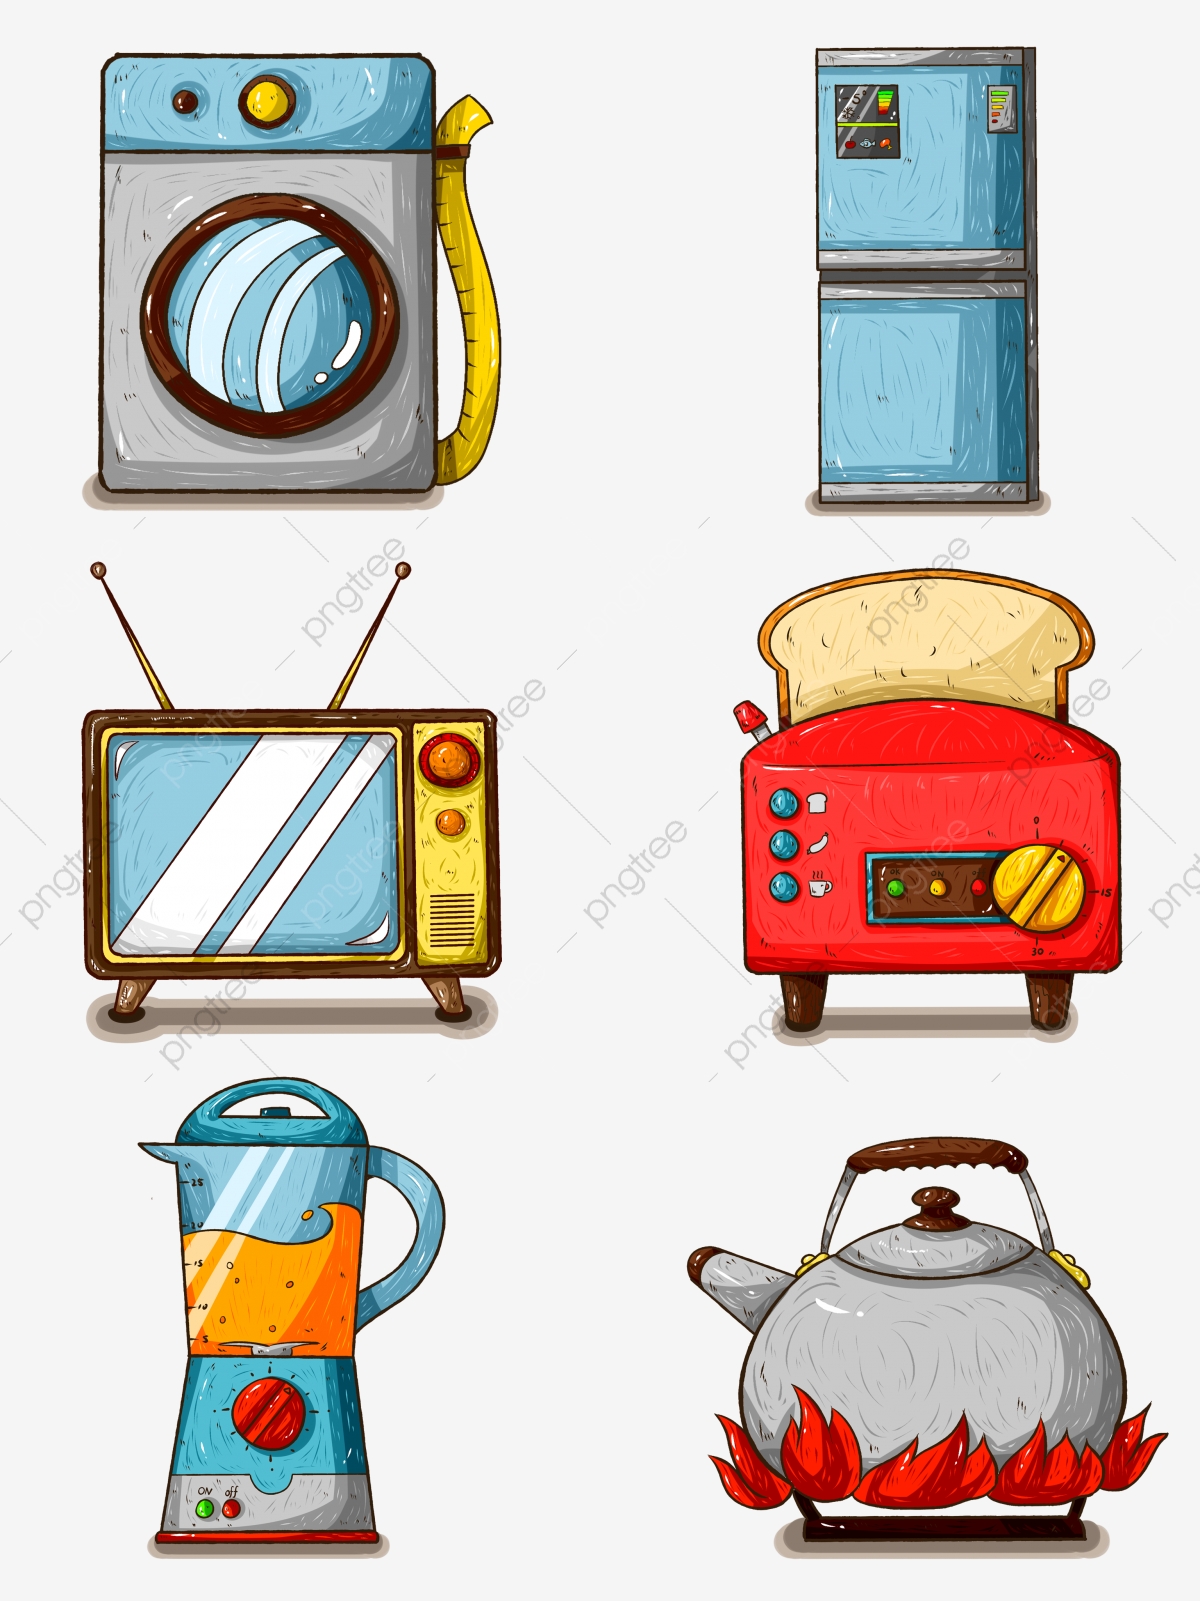 refrigerator clipart household